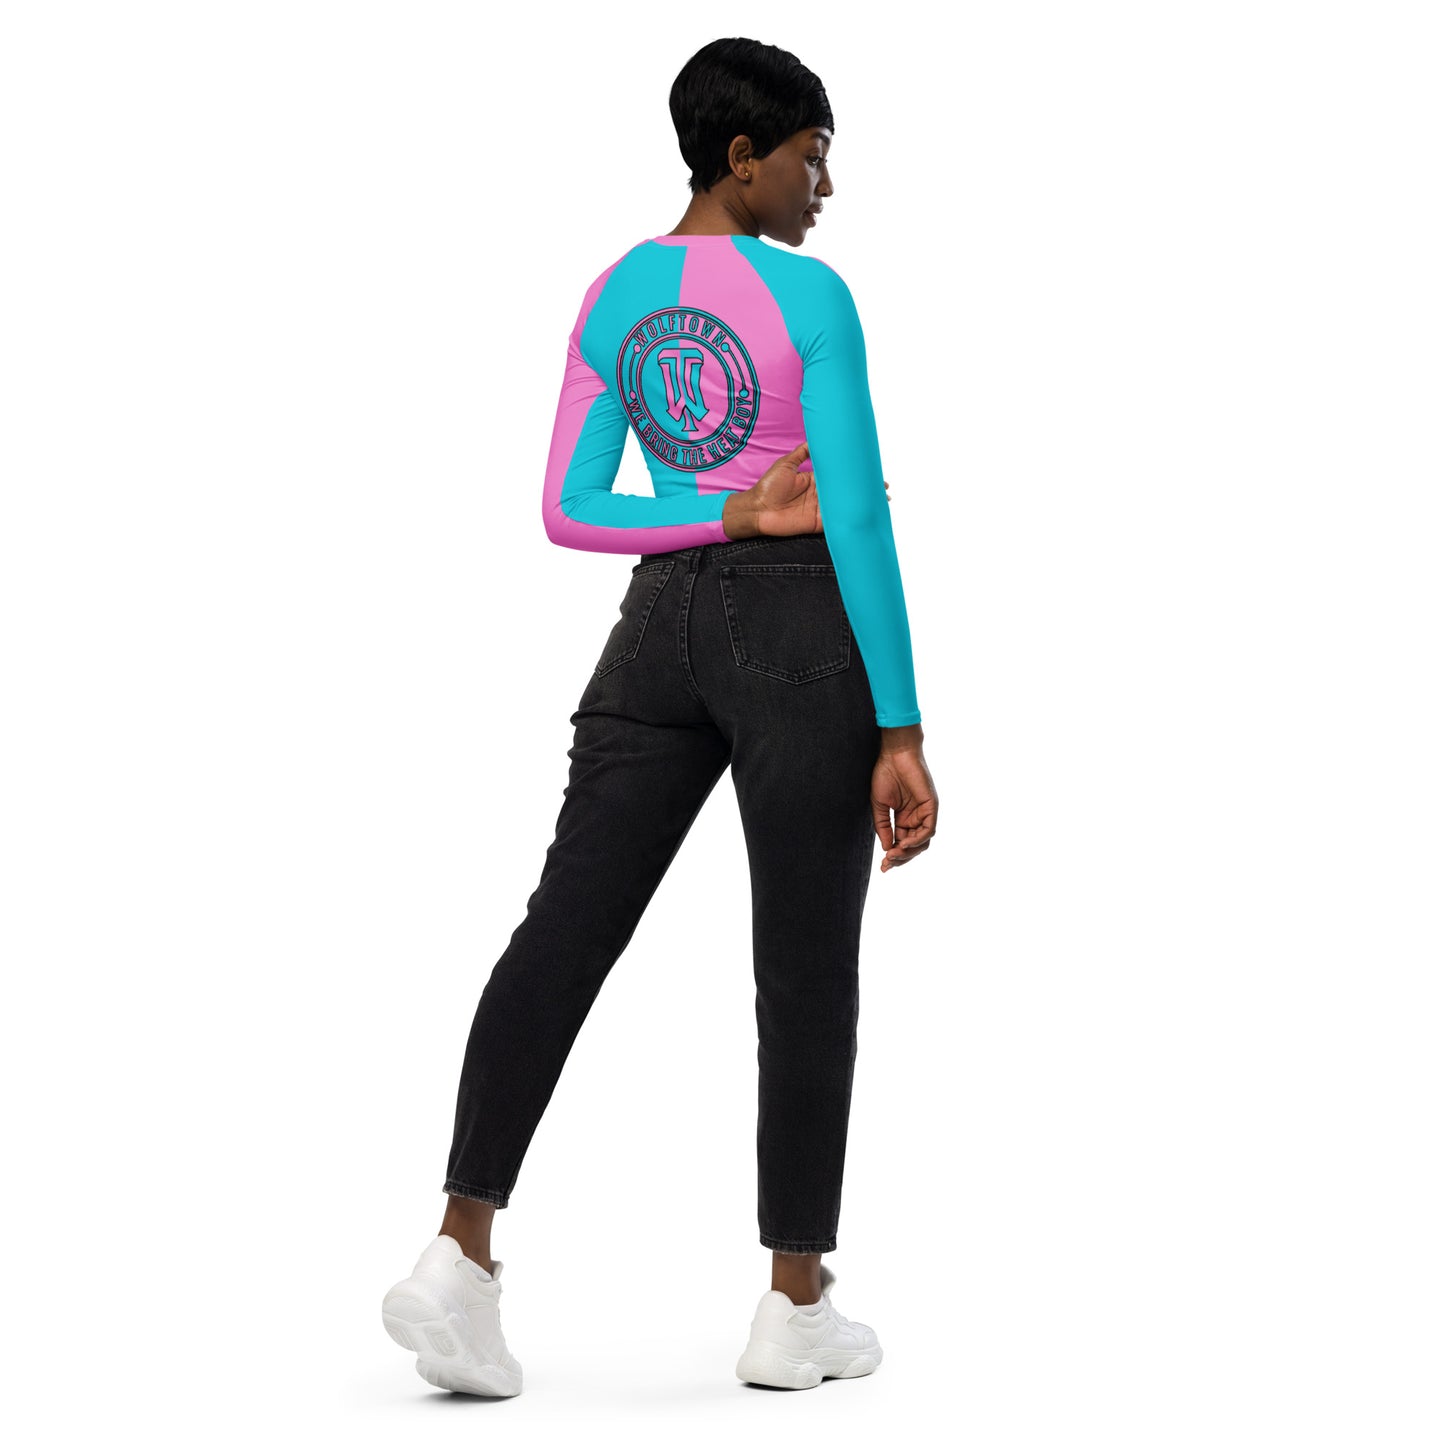 WOLFTOWN 'NEW DAY' (Long-Sleeve Crop Top)